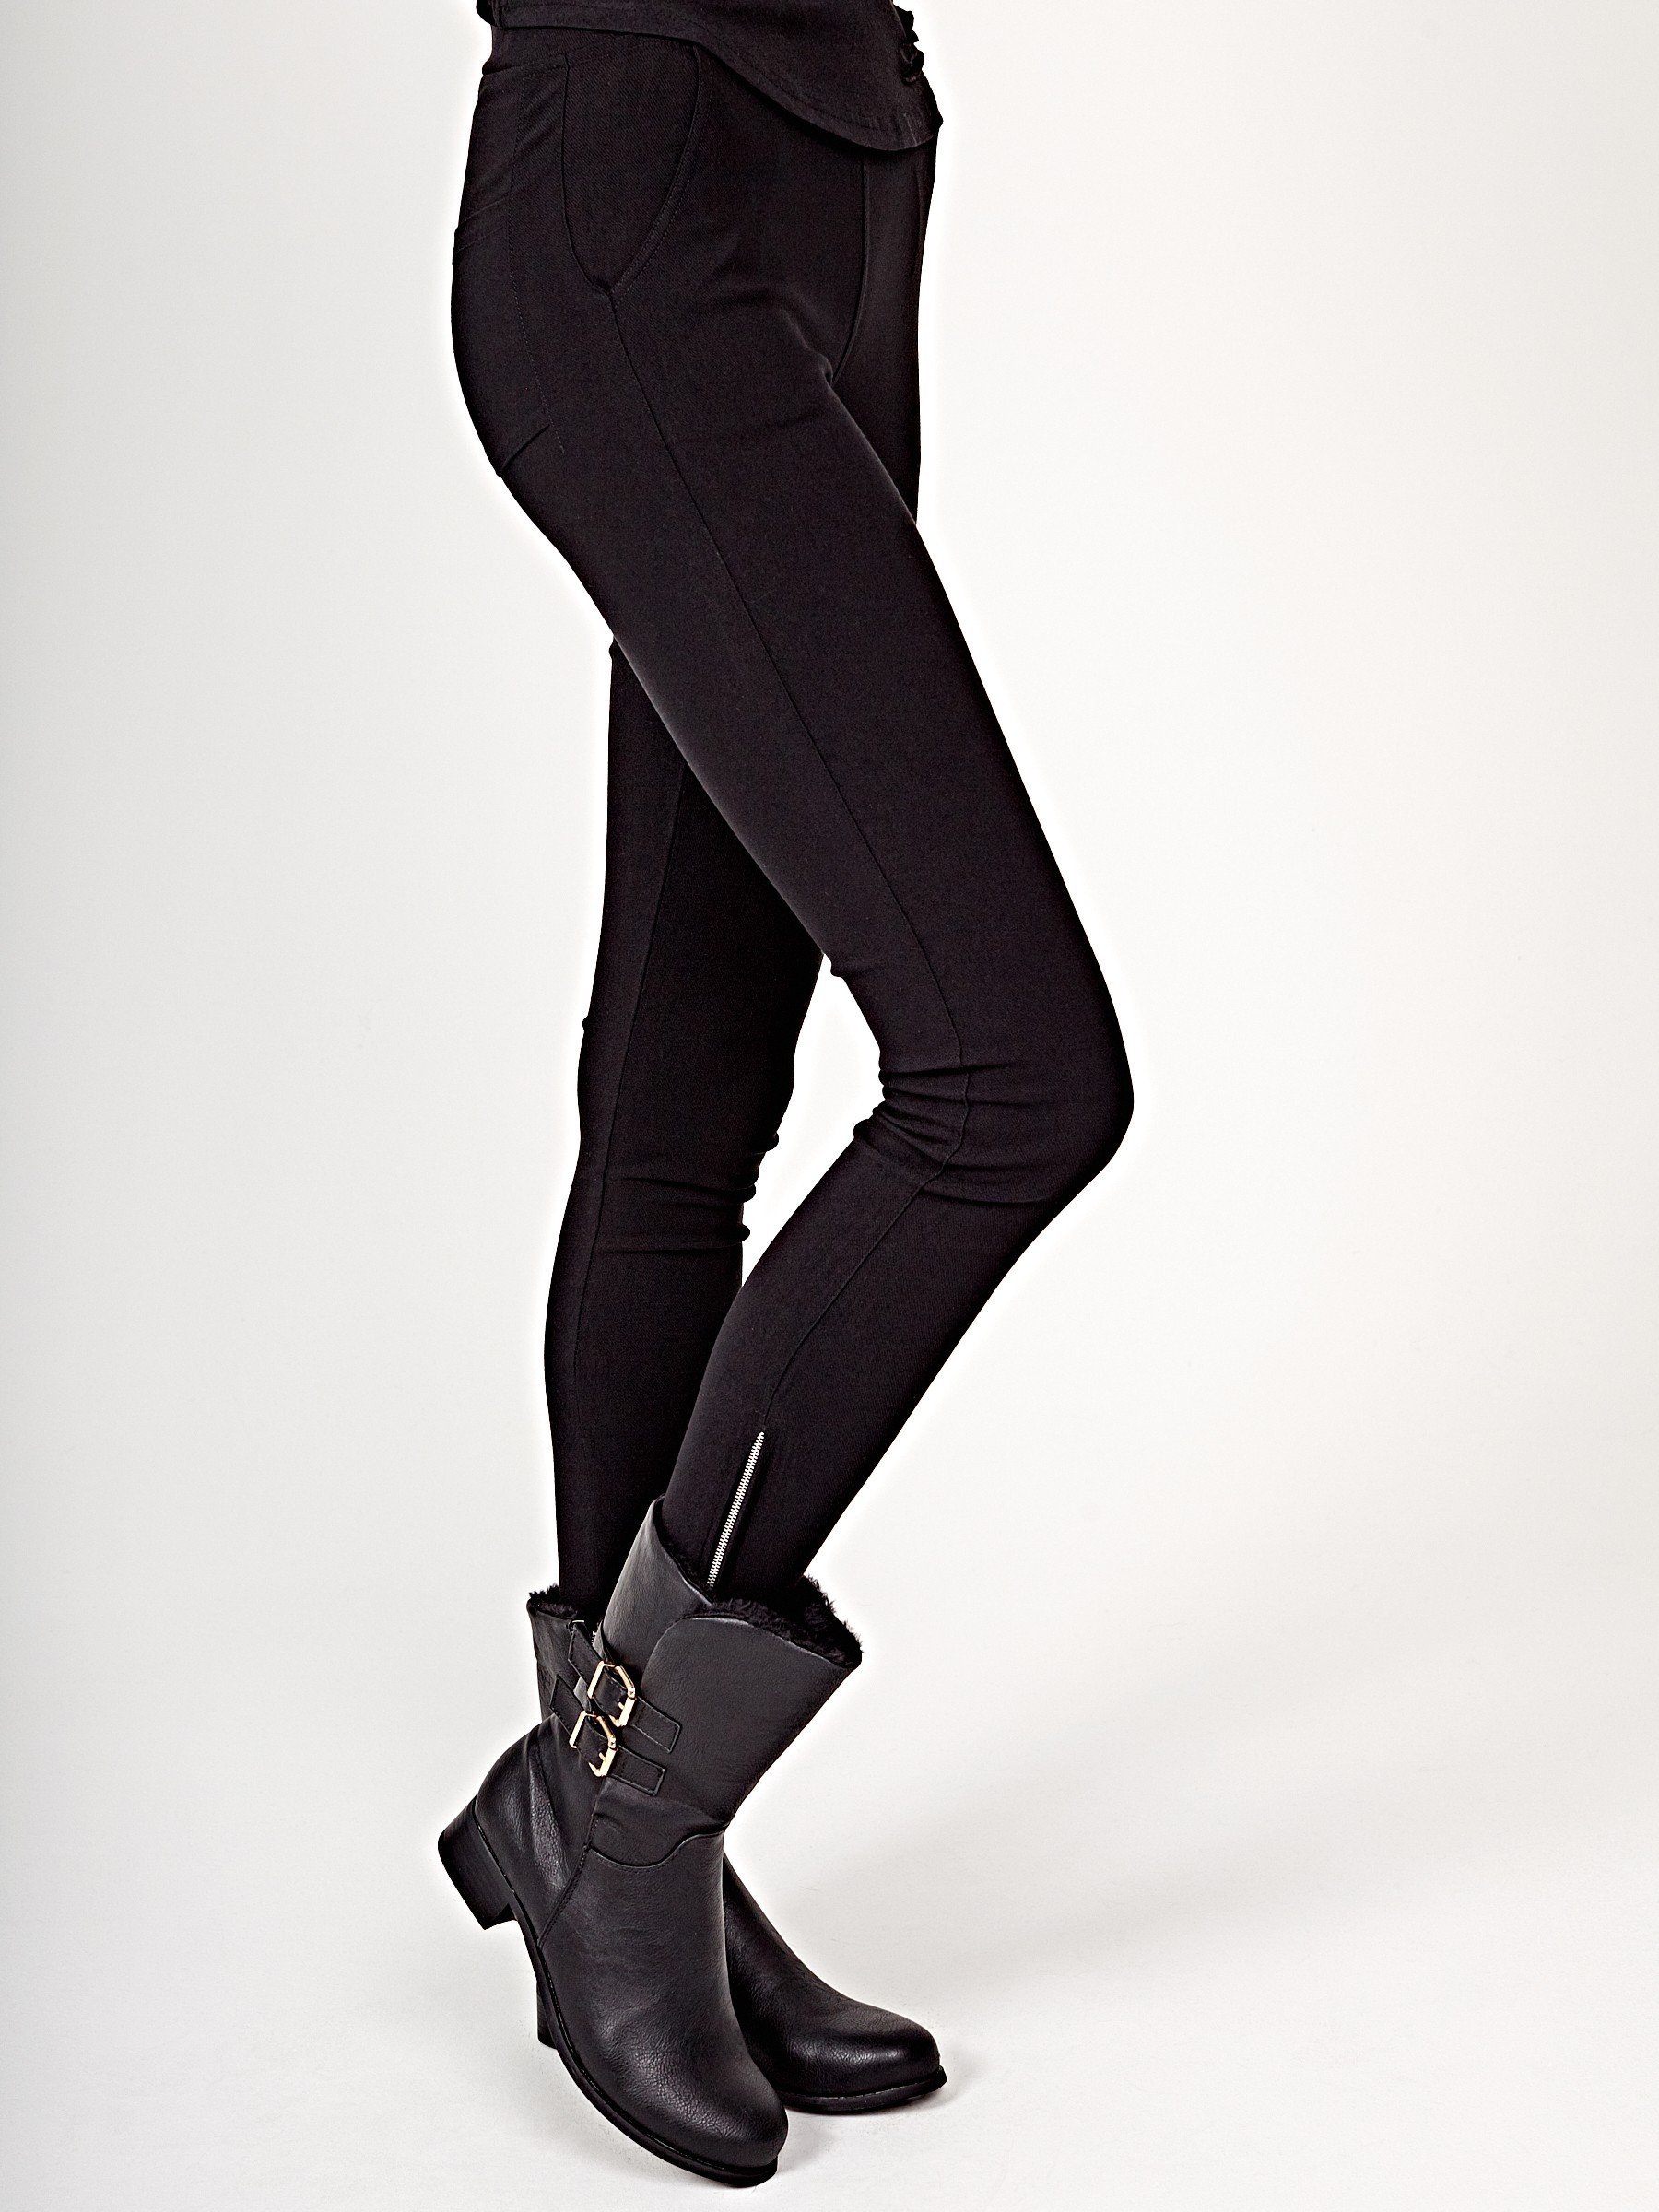 black leggings with ankle zippers